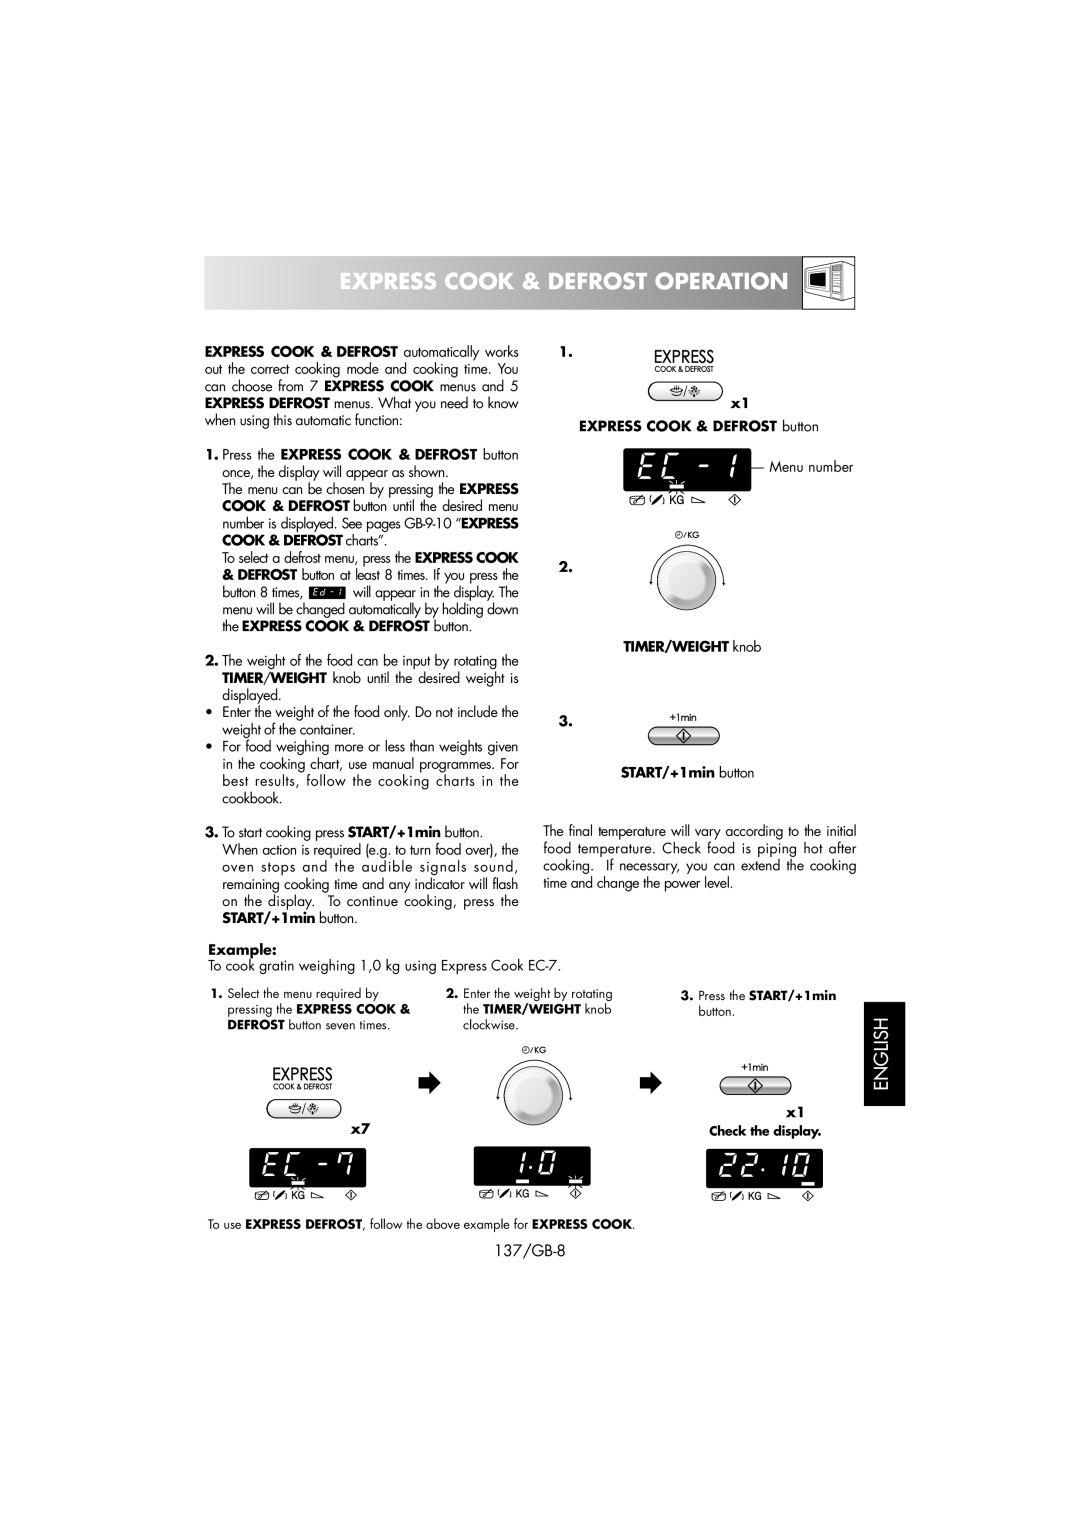 Sharp R-239 operation manual Express Cook & Defrost Operation, English, 137/GB-8 